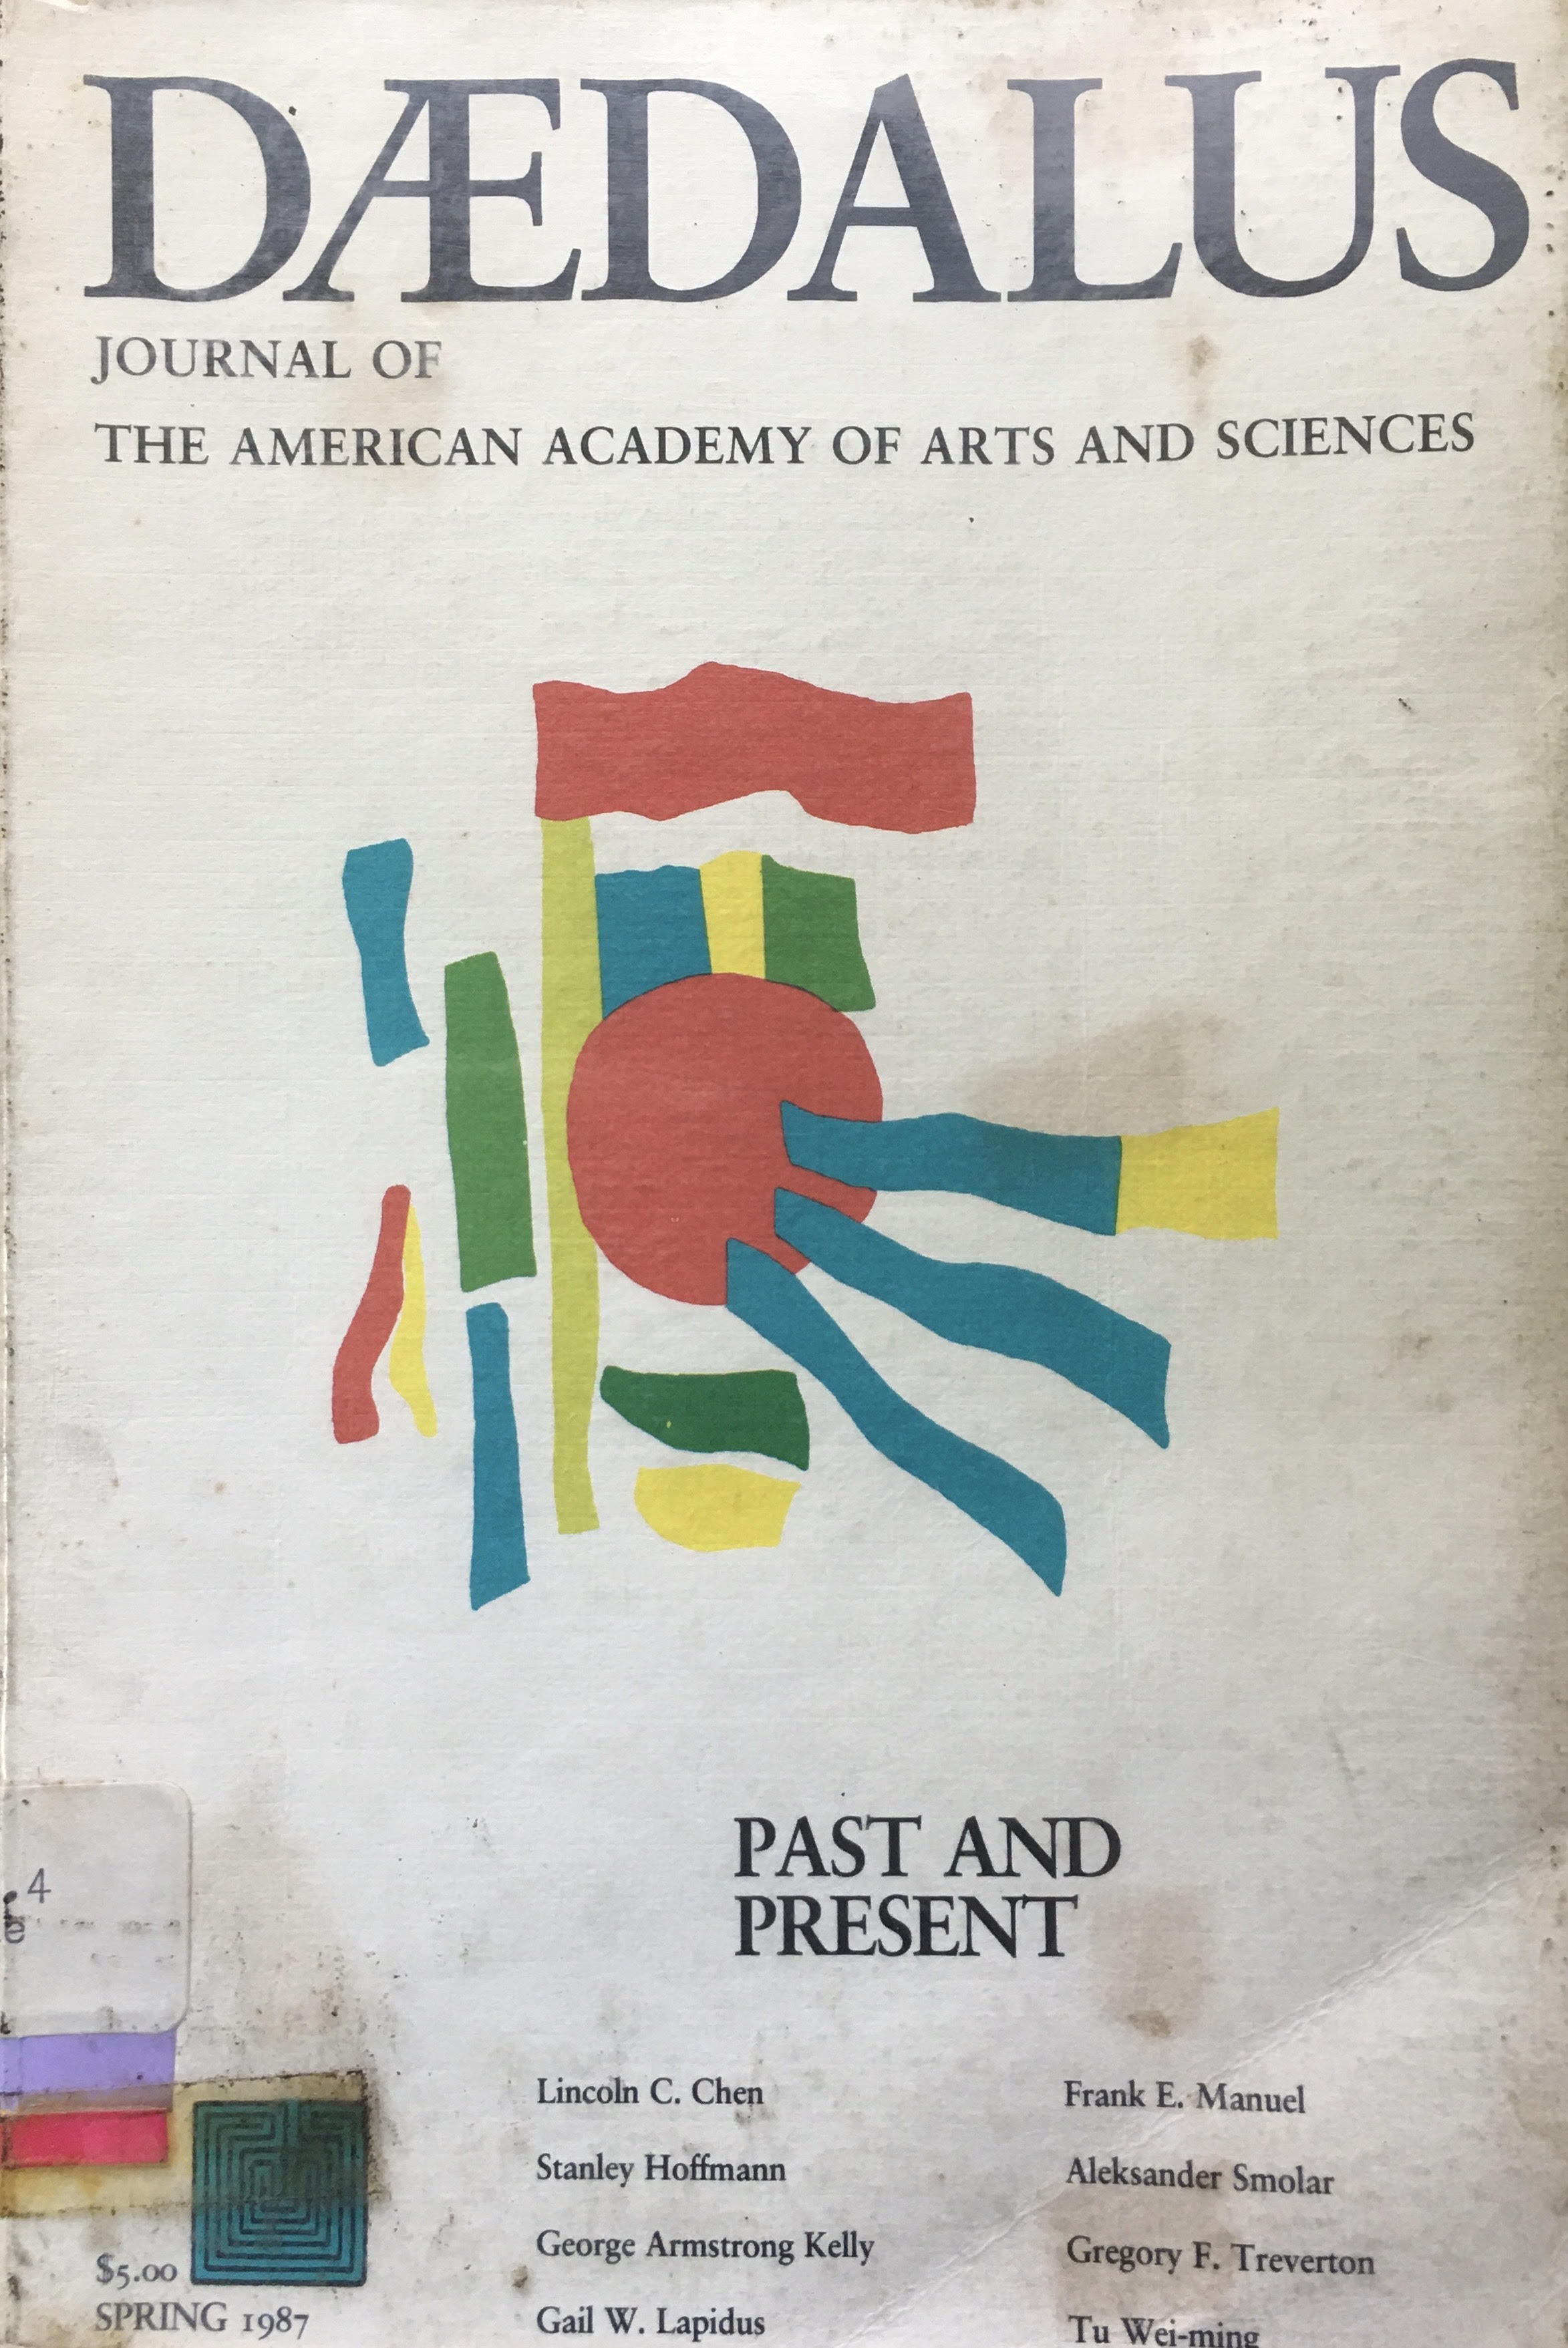 Daedalus Journal of the American academy of arts and sciences :  Past and present